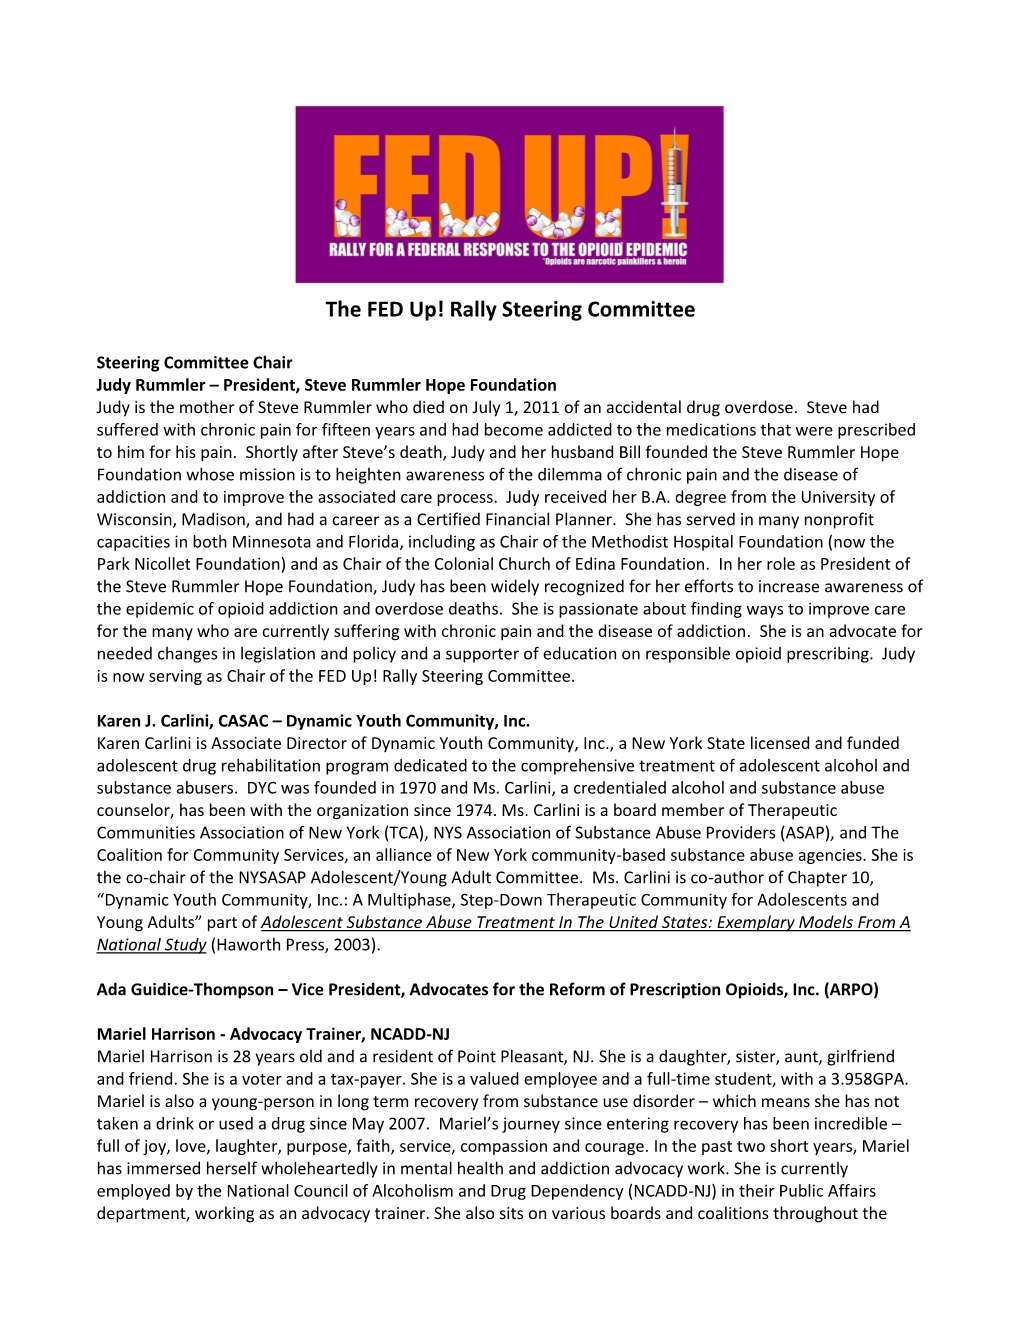 The FED Up! Rally Steering Committee